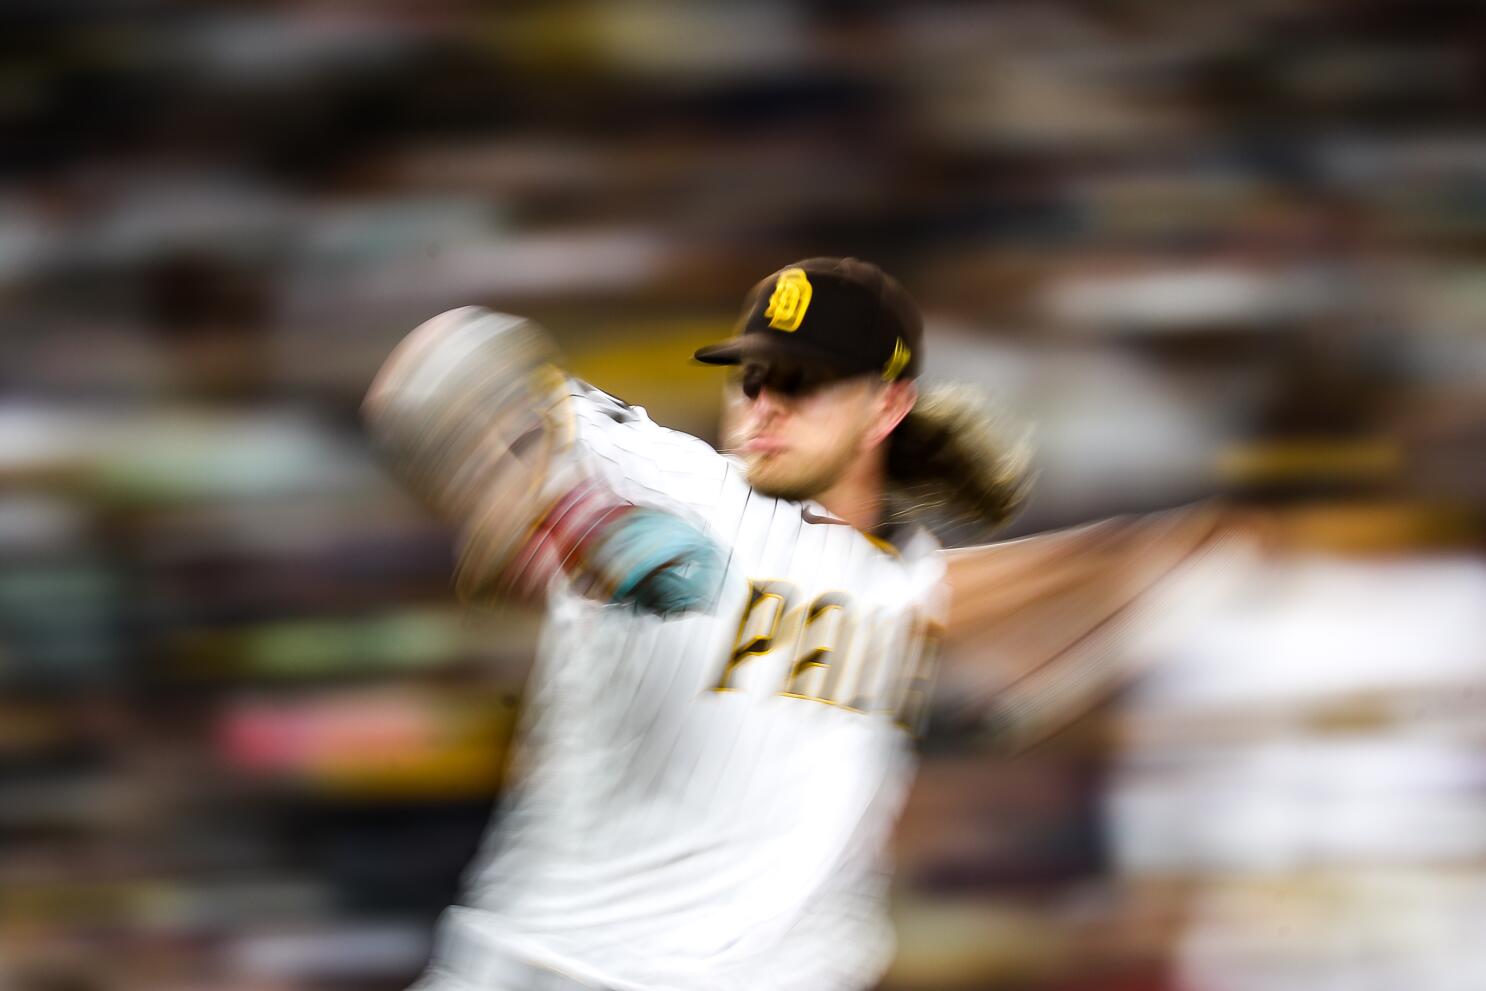 Tom Krasovic: Padres closer Josh Hader is a product of MLB's